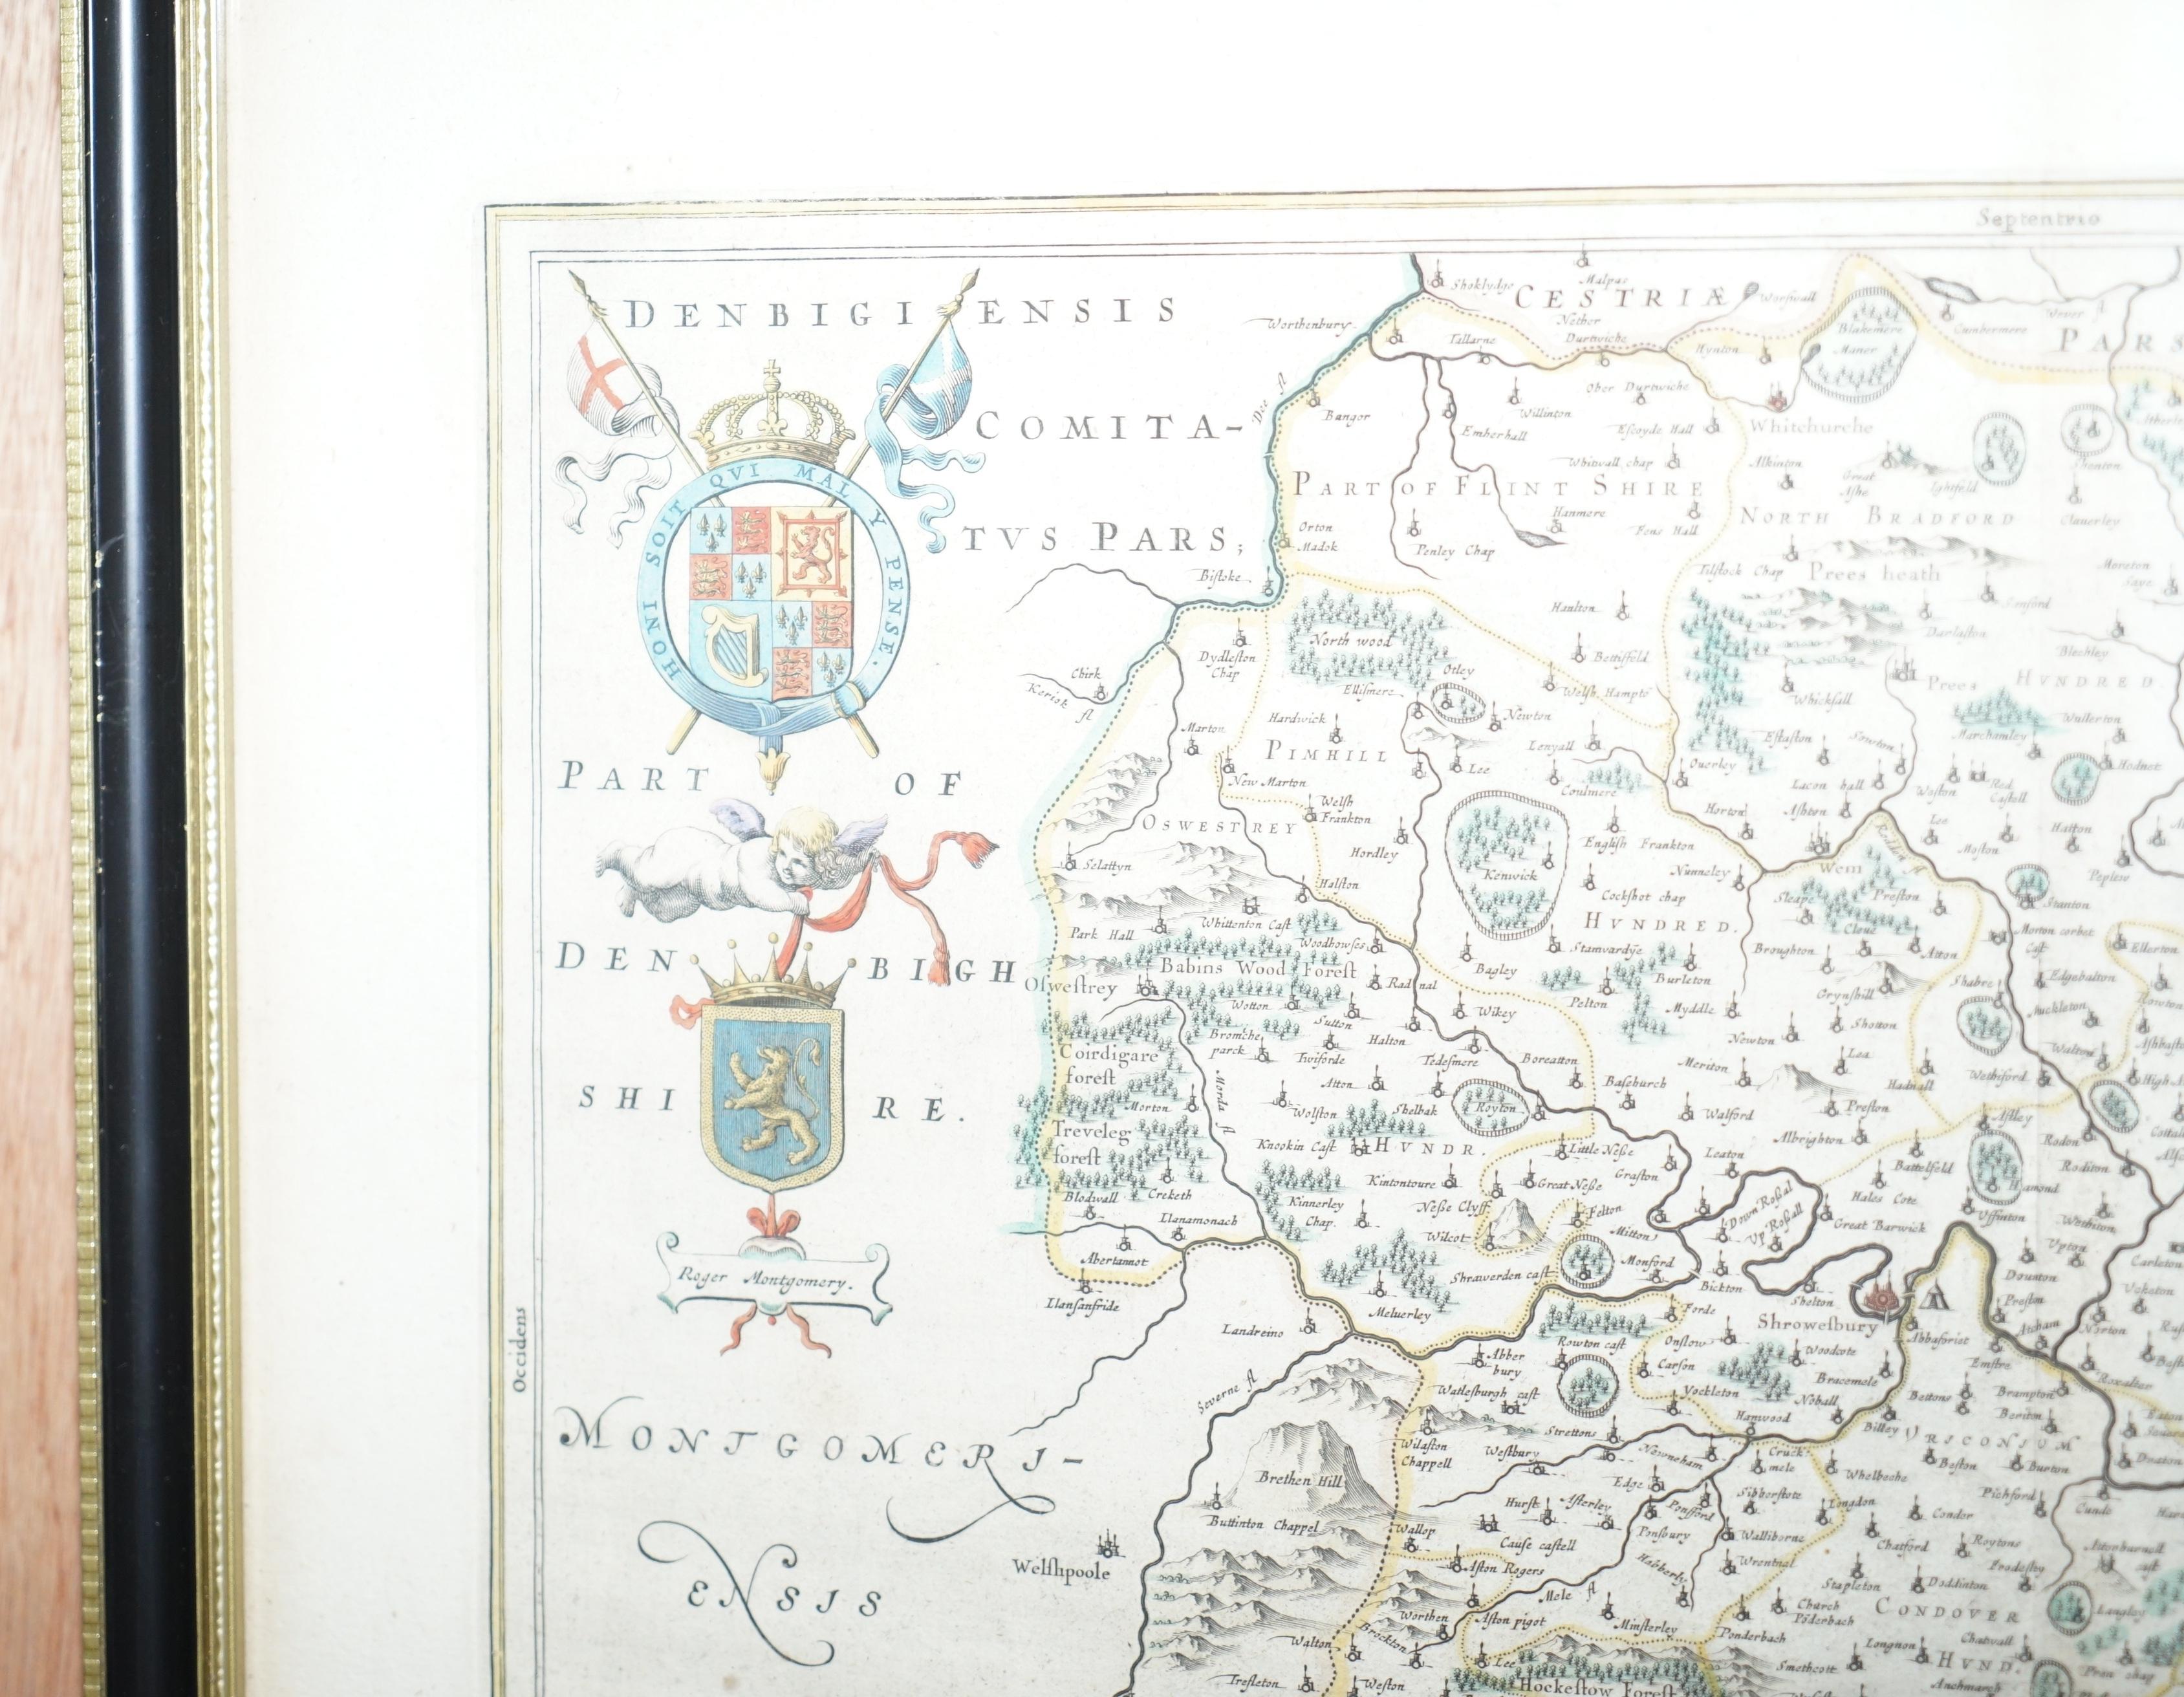 We are delighted to offer for sale this lovely antique Atlas page map of Staffordshire printed in 1645 Amsterdam Staffordiensis Comitatvs Vulgo

This one is two pages from an antique atlas, it has been plate printed and hand coloured, the detail